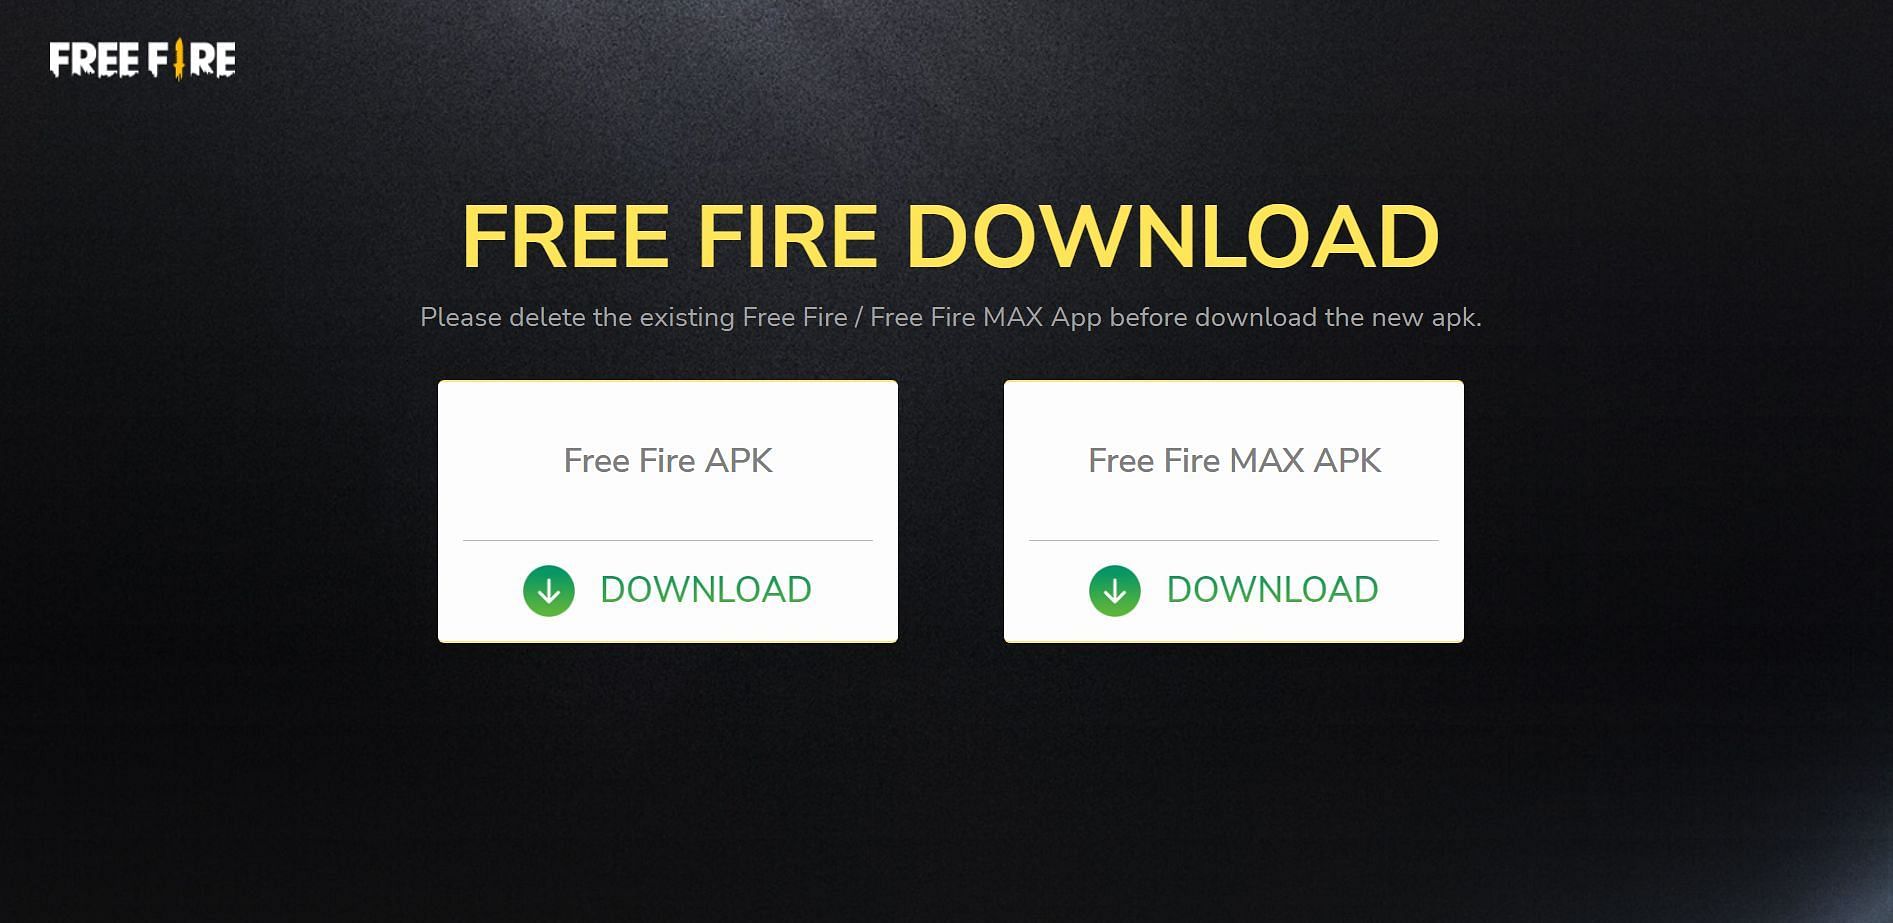 Players will have to select the first option to get the APK file for the latest version (Image via Garena)